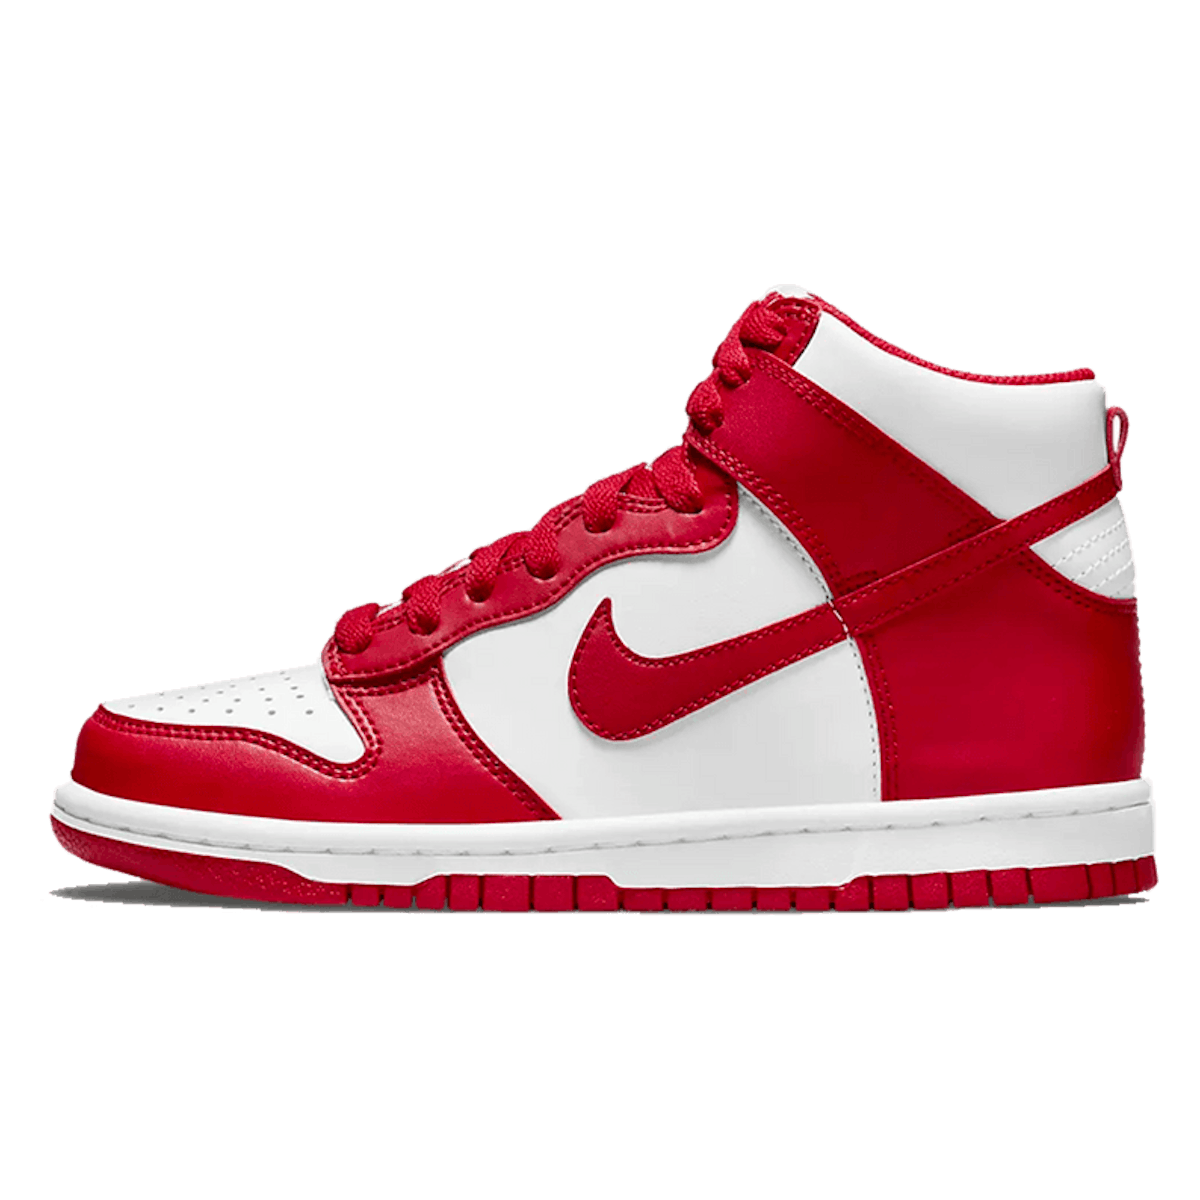 Nike Dunk High GS "Championship Red"